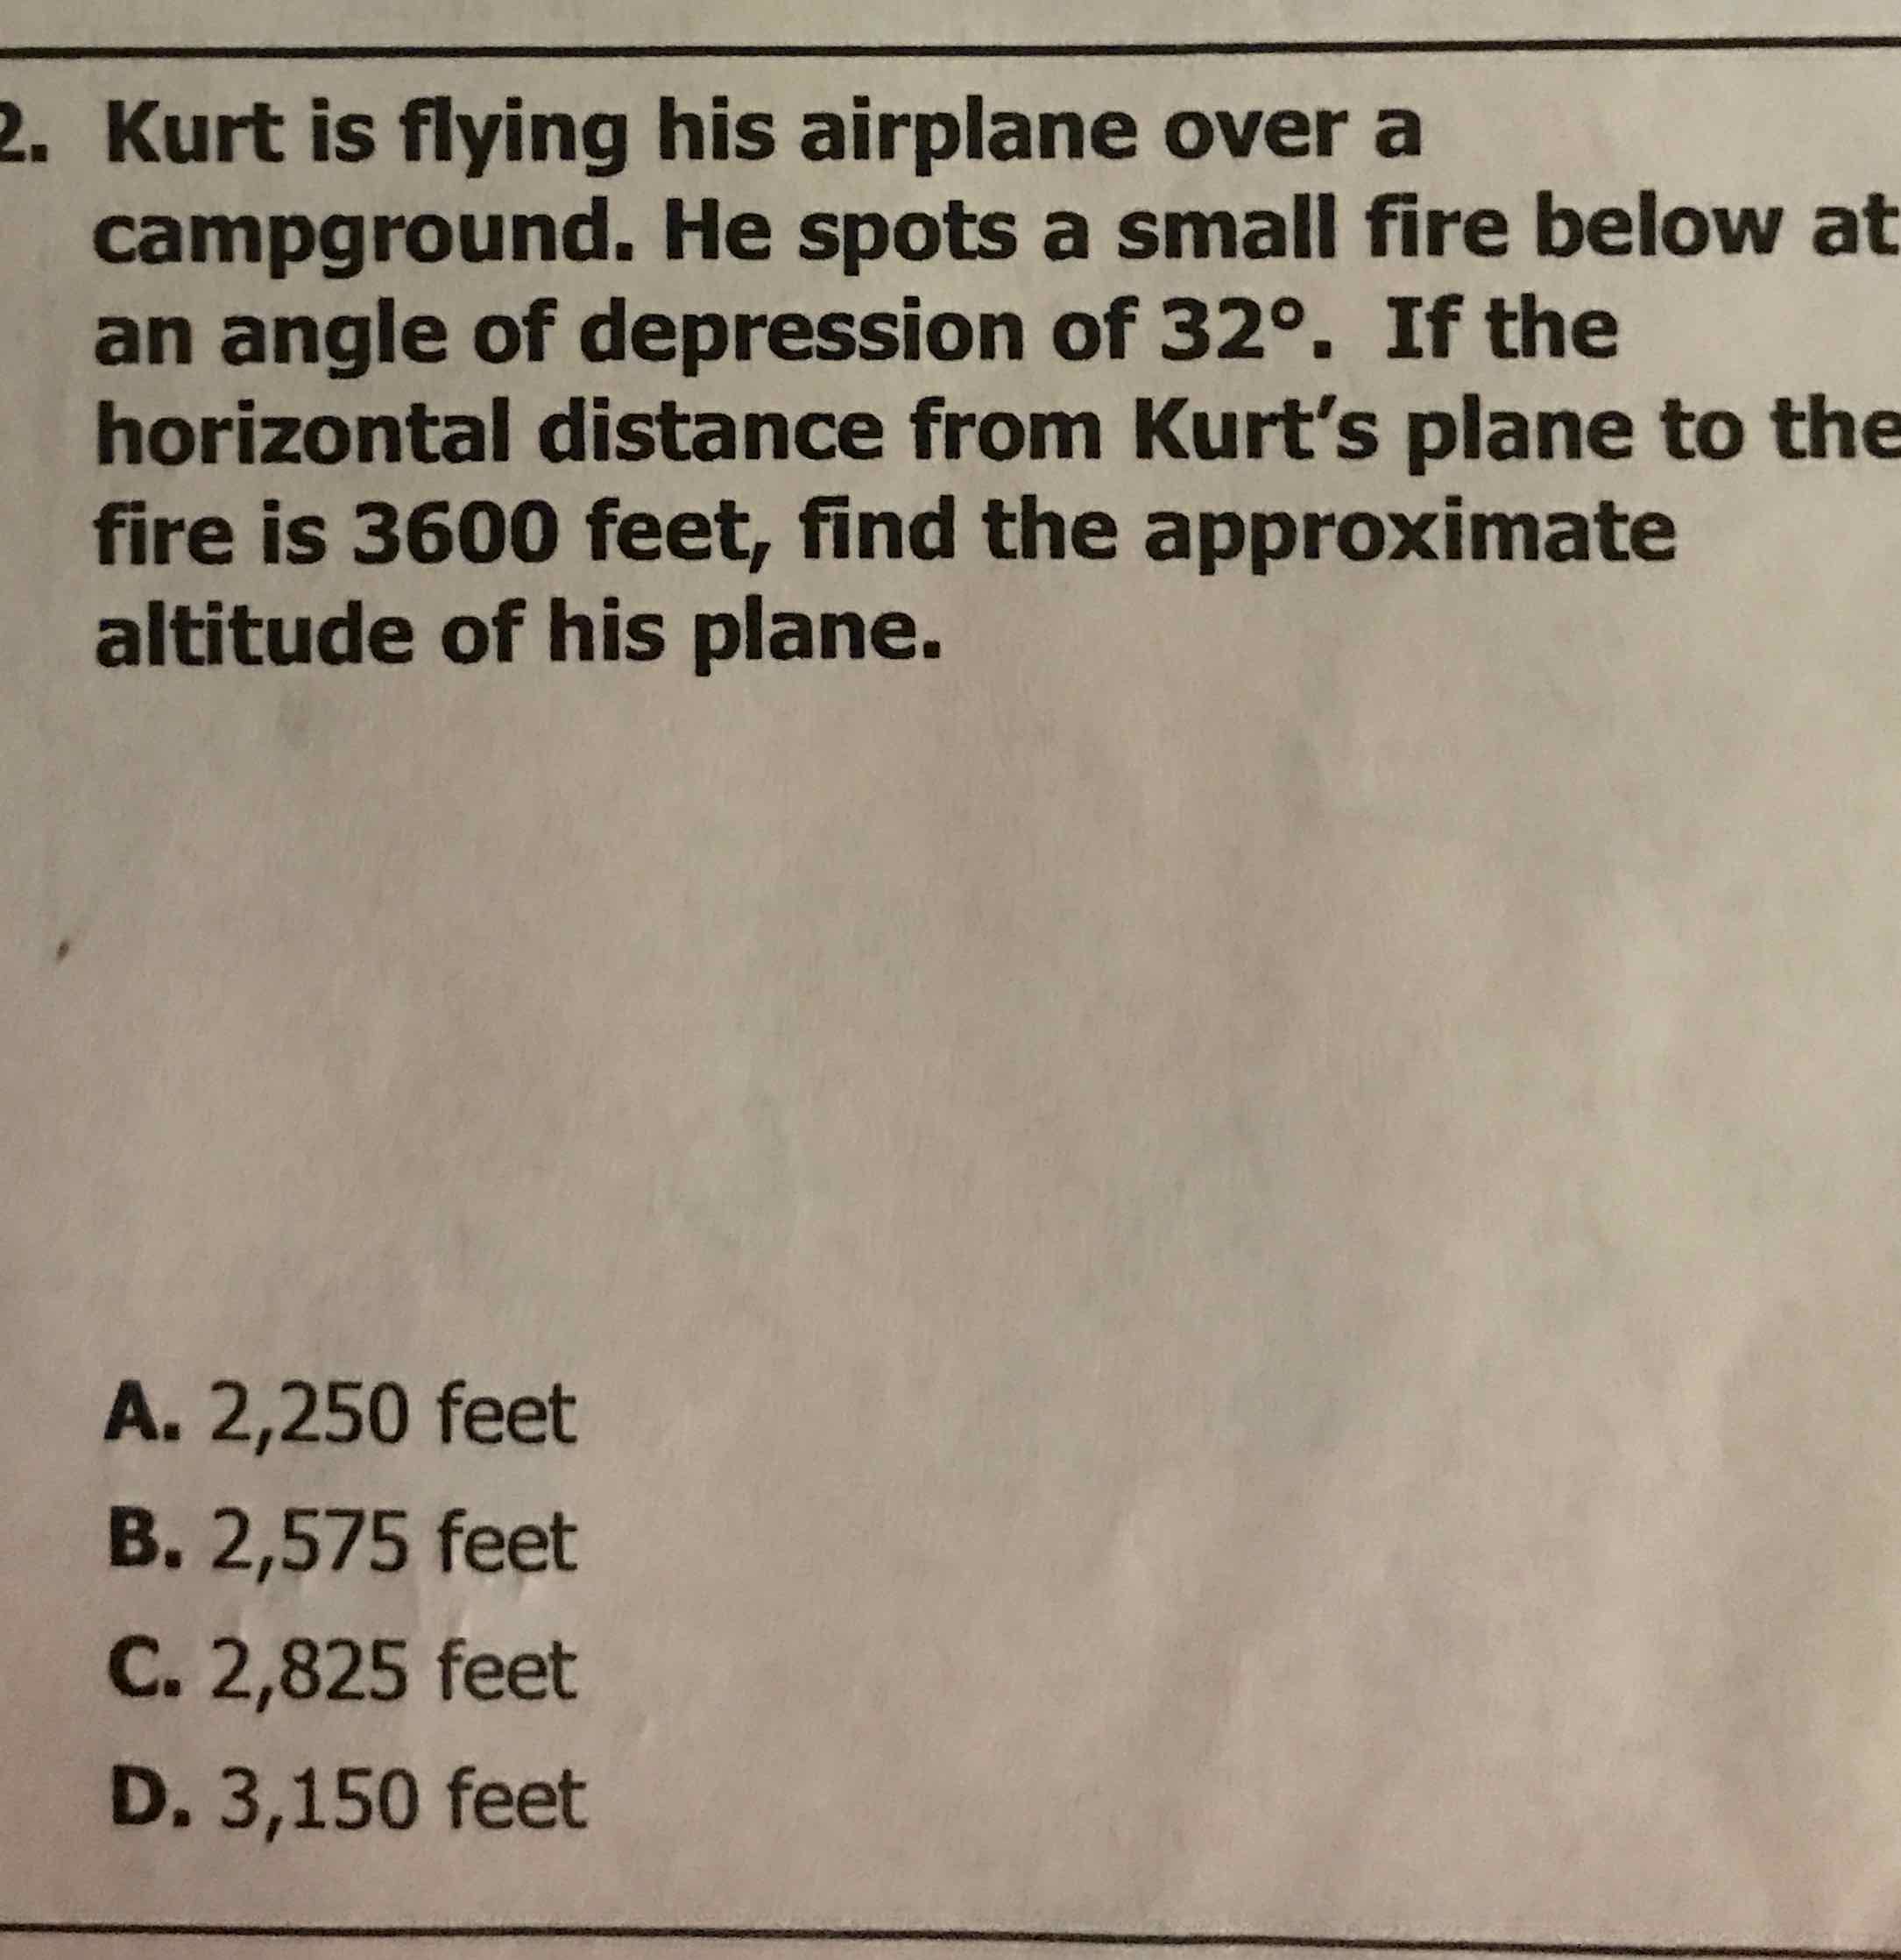 Kurt is flying his airplane over a campground. He spots a small fire below at an angle of depression of \( 32^{\circ} \). If the horizontal distance from Kurt's plane to the fire is 3600 feet, find the approximate altitude of his plane.
A. 2,250 feet
B. 2,575 feet
C. 2,825 feet
D. 3,150 feet